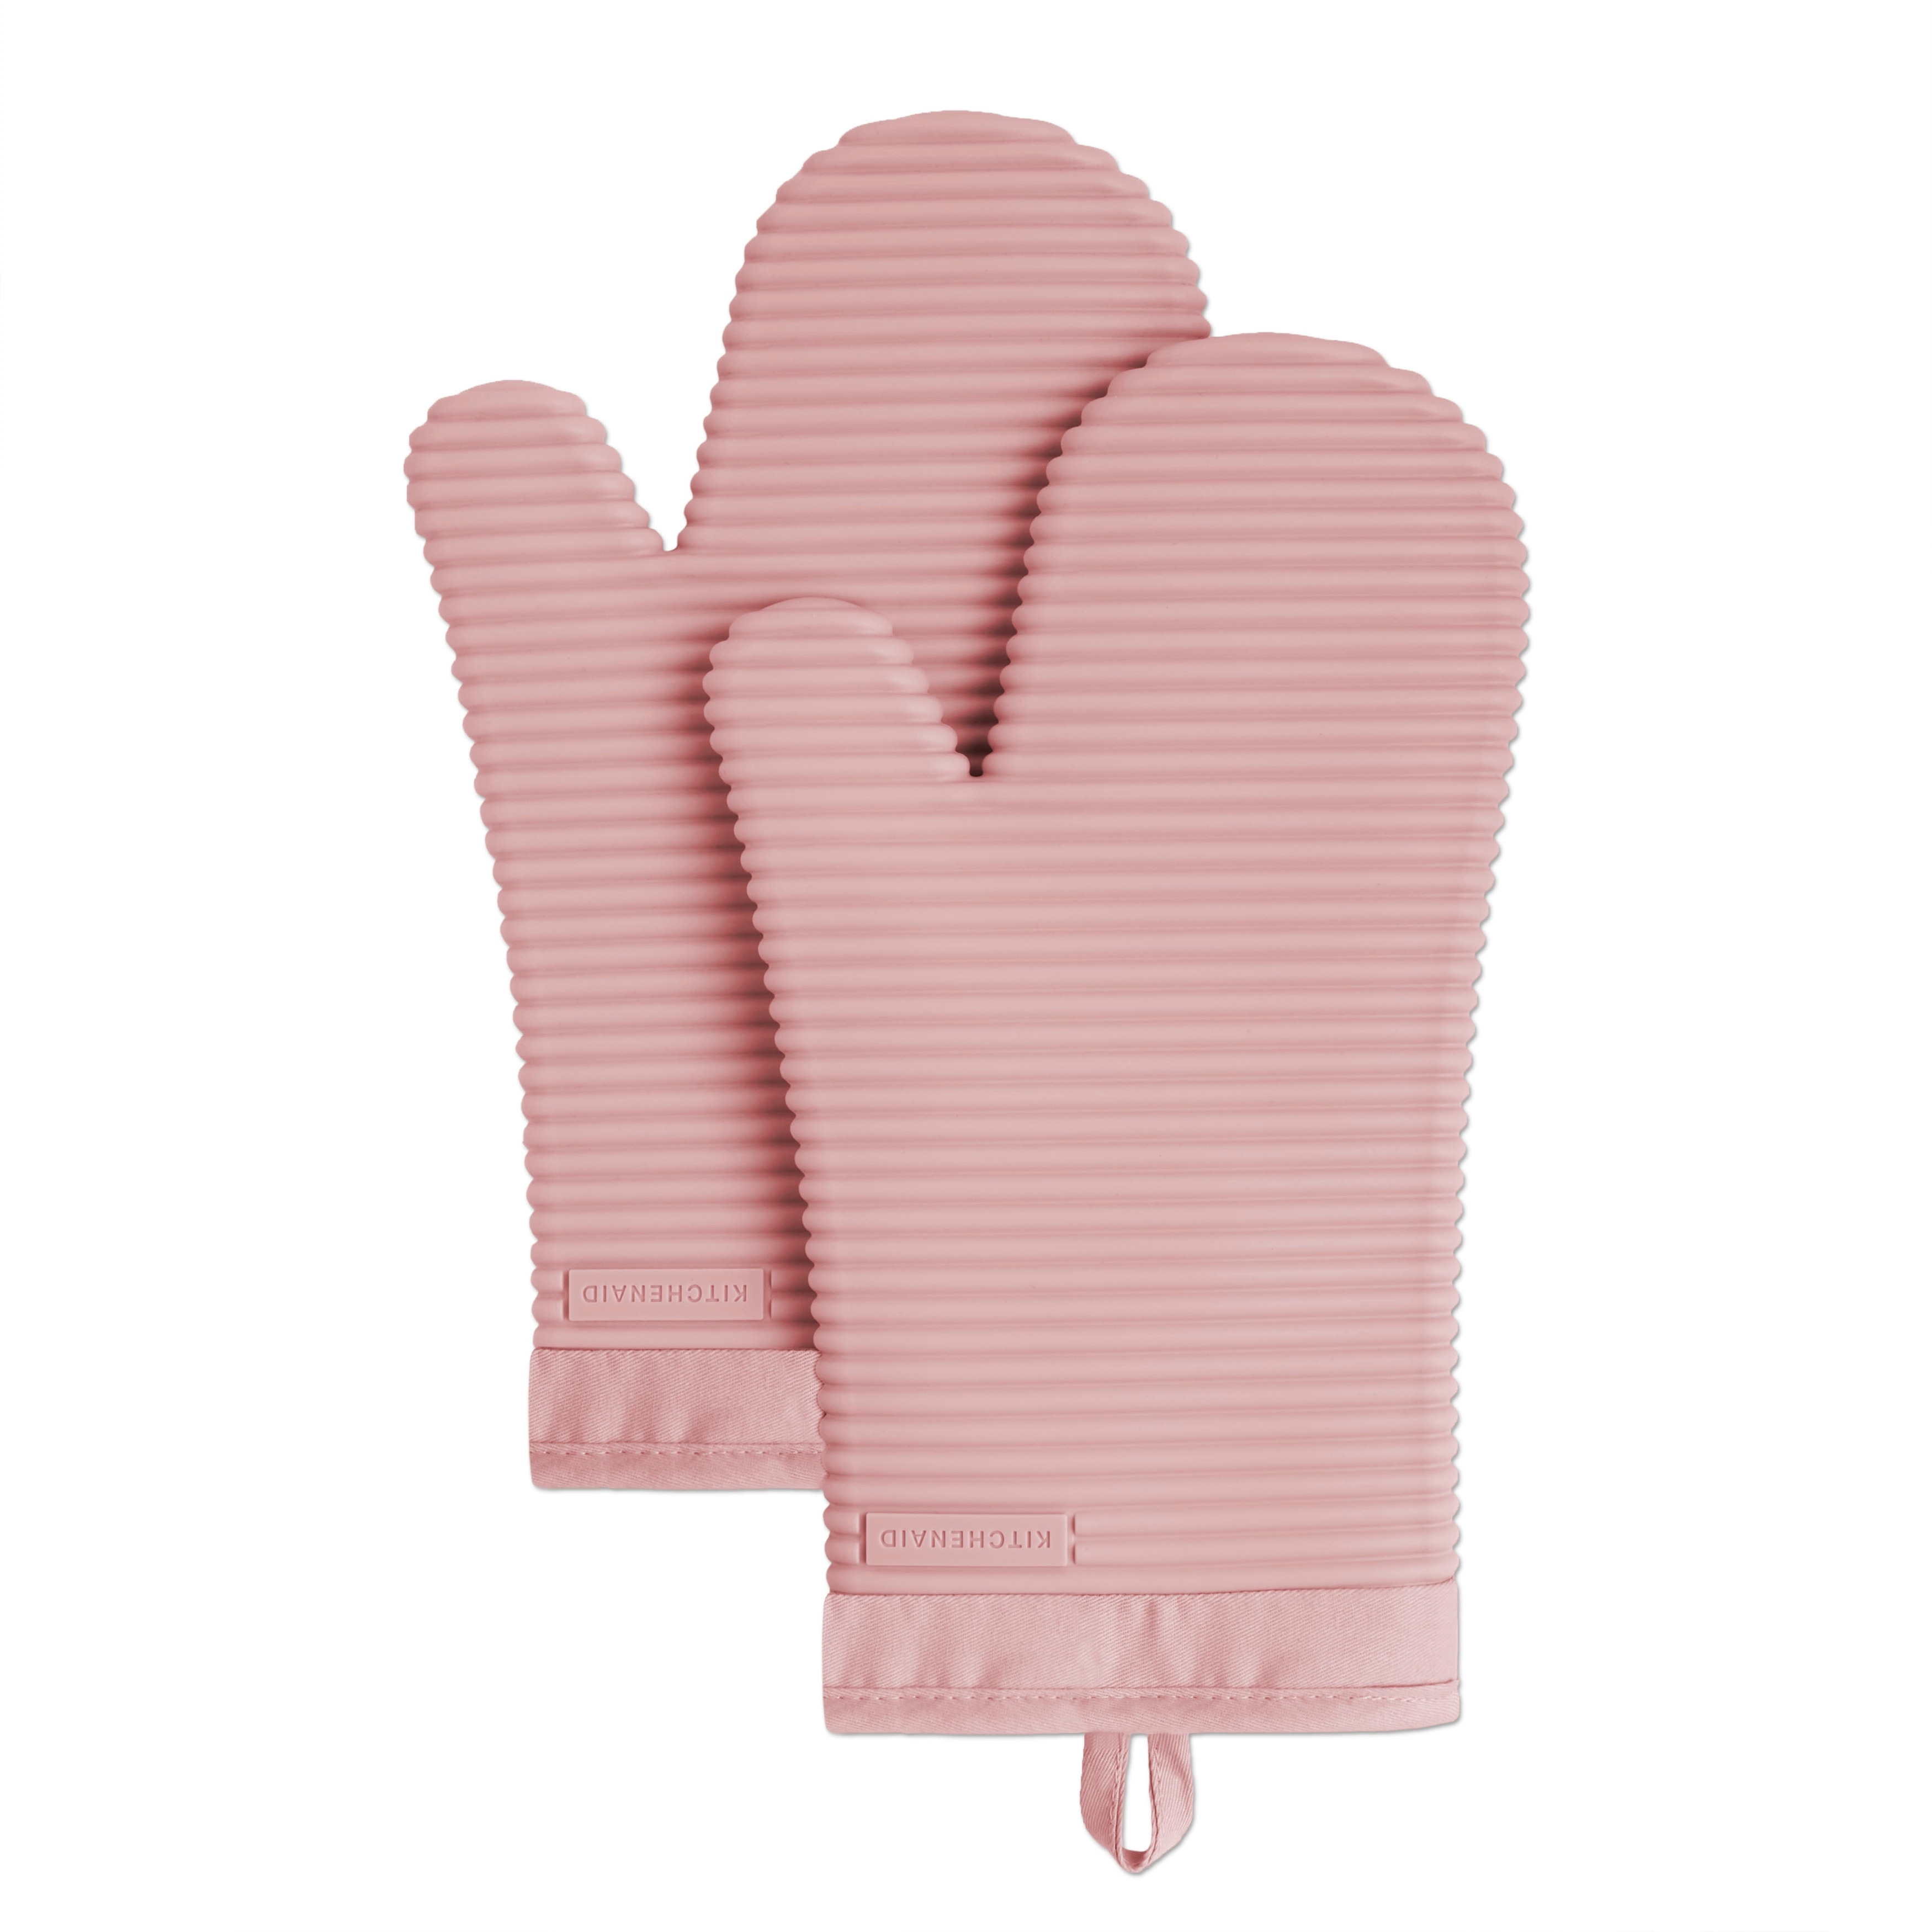 Harman Pink Cupcake Printed Oven Mitts 2pc – The Cuisinet